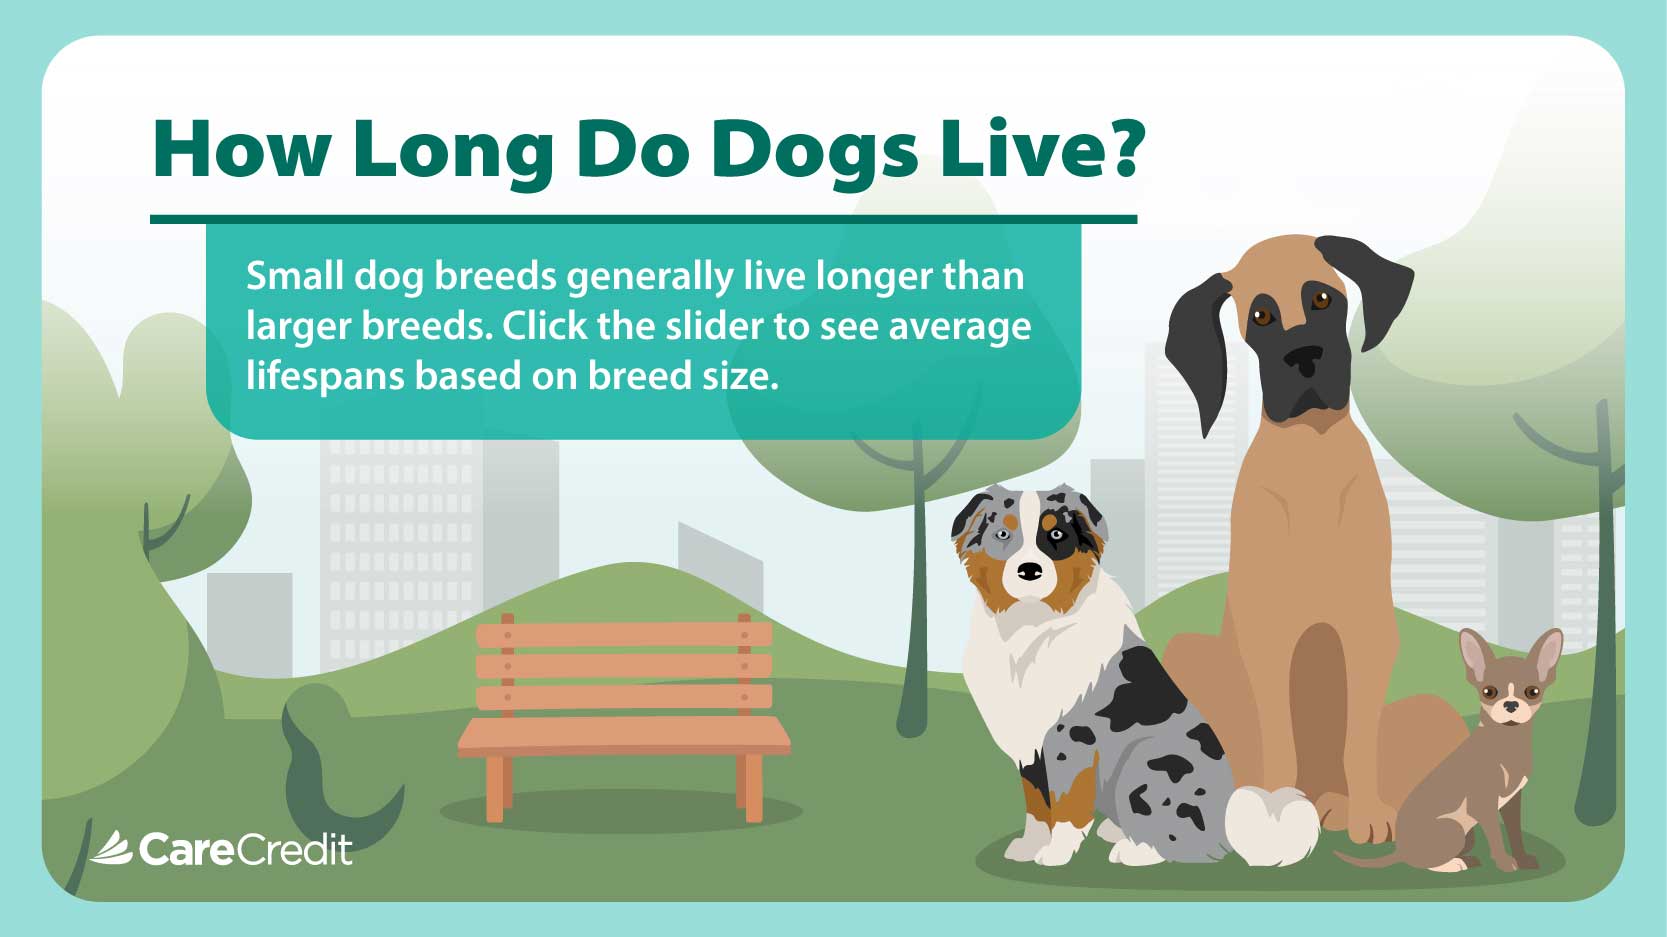 How Long Do Dogs Live?